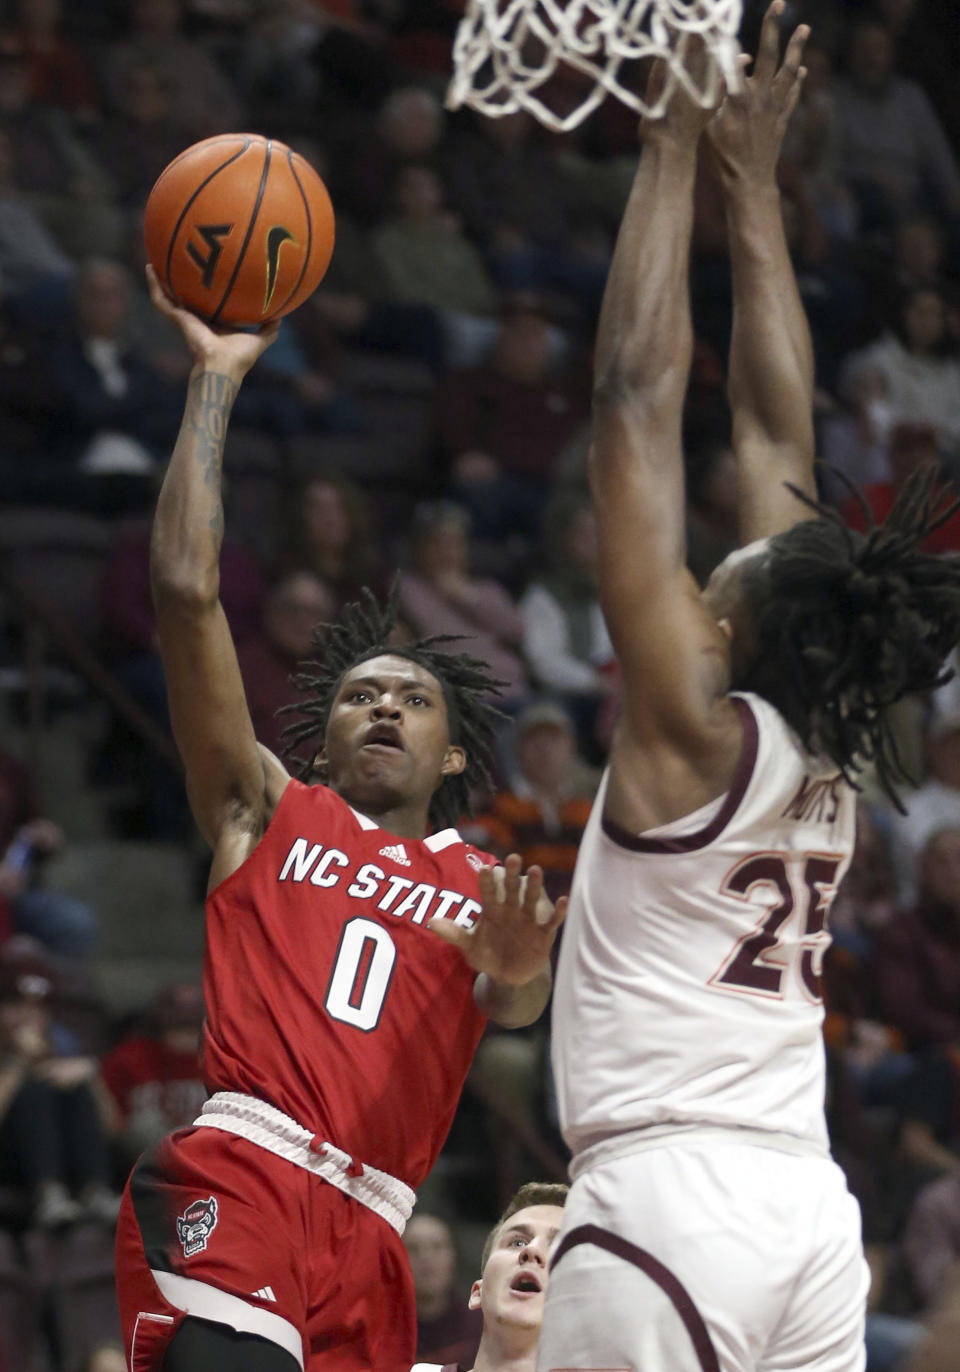 North Carolina State's Terquavion Smith (0) shoots while defended by Virginia Tech's Justyn Mutts (25) during the first half of an NCAA college basketball game Saturday, Jan. 7, 2023, in Blacksburg, Va. (Matt Gentry/The Roanoke Times via AP)